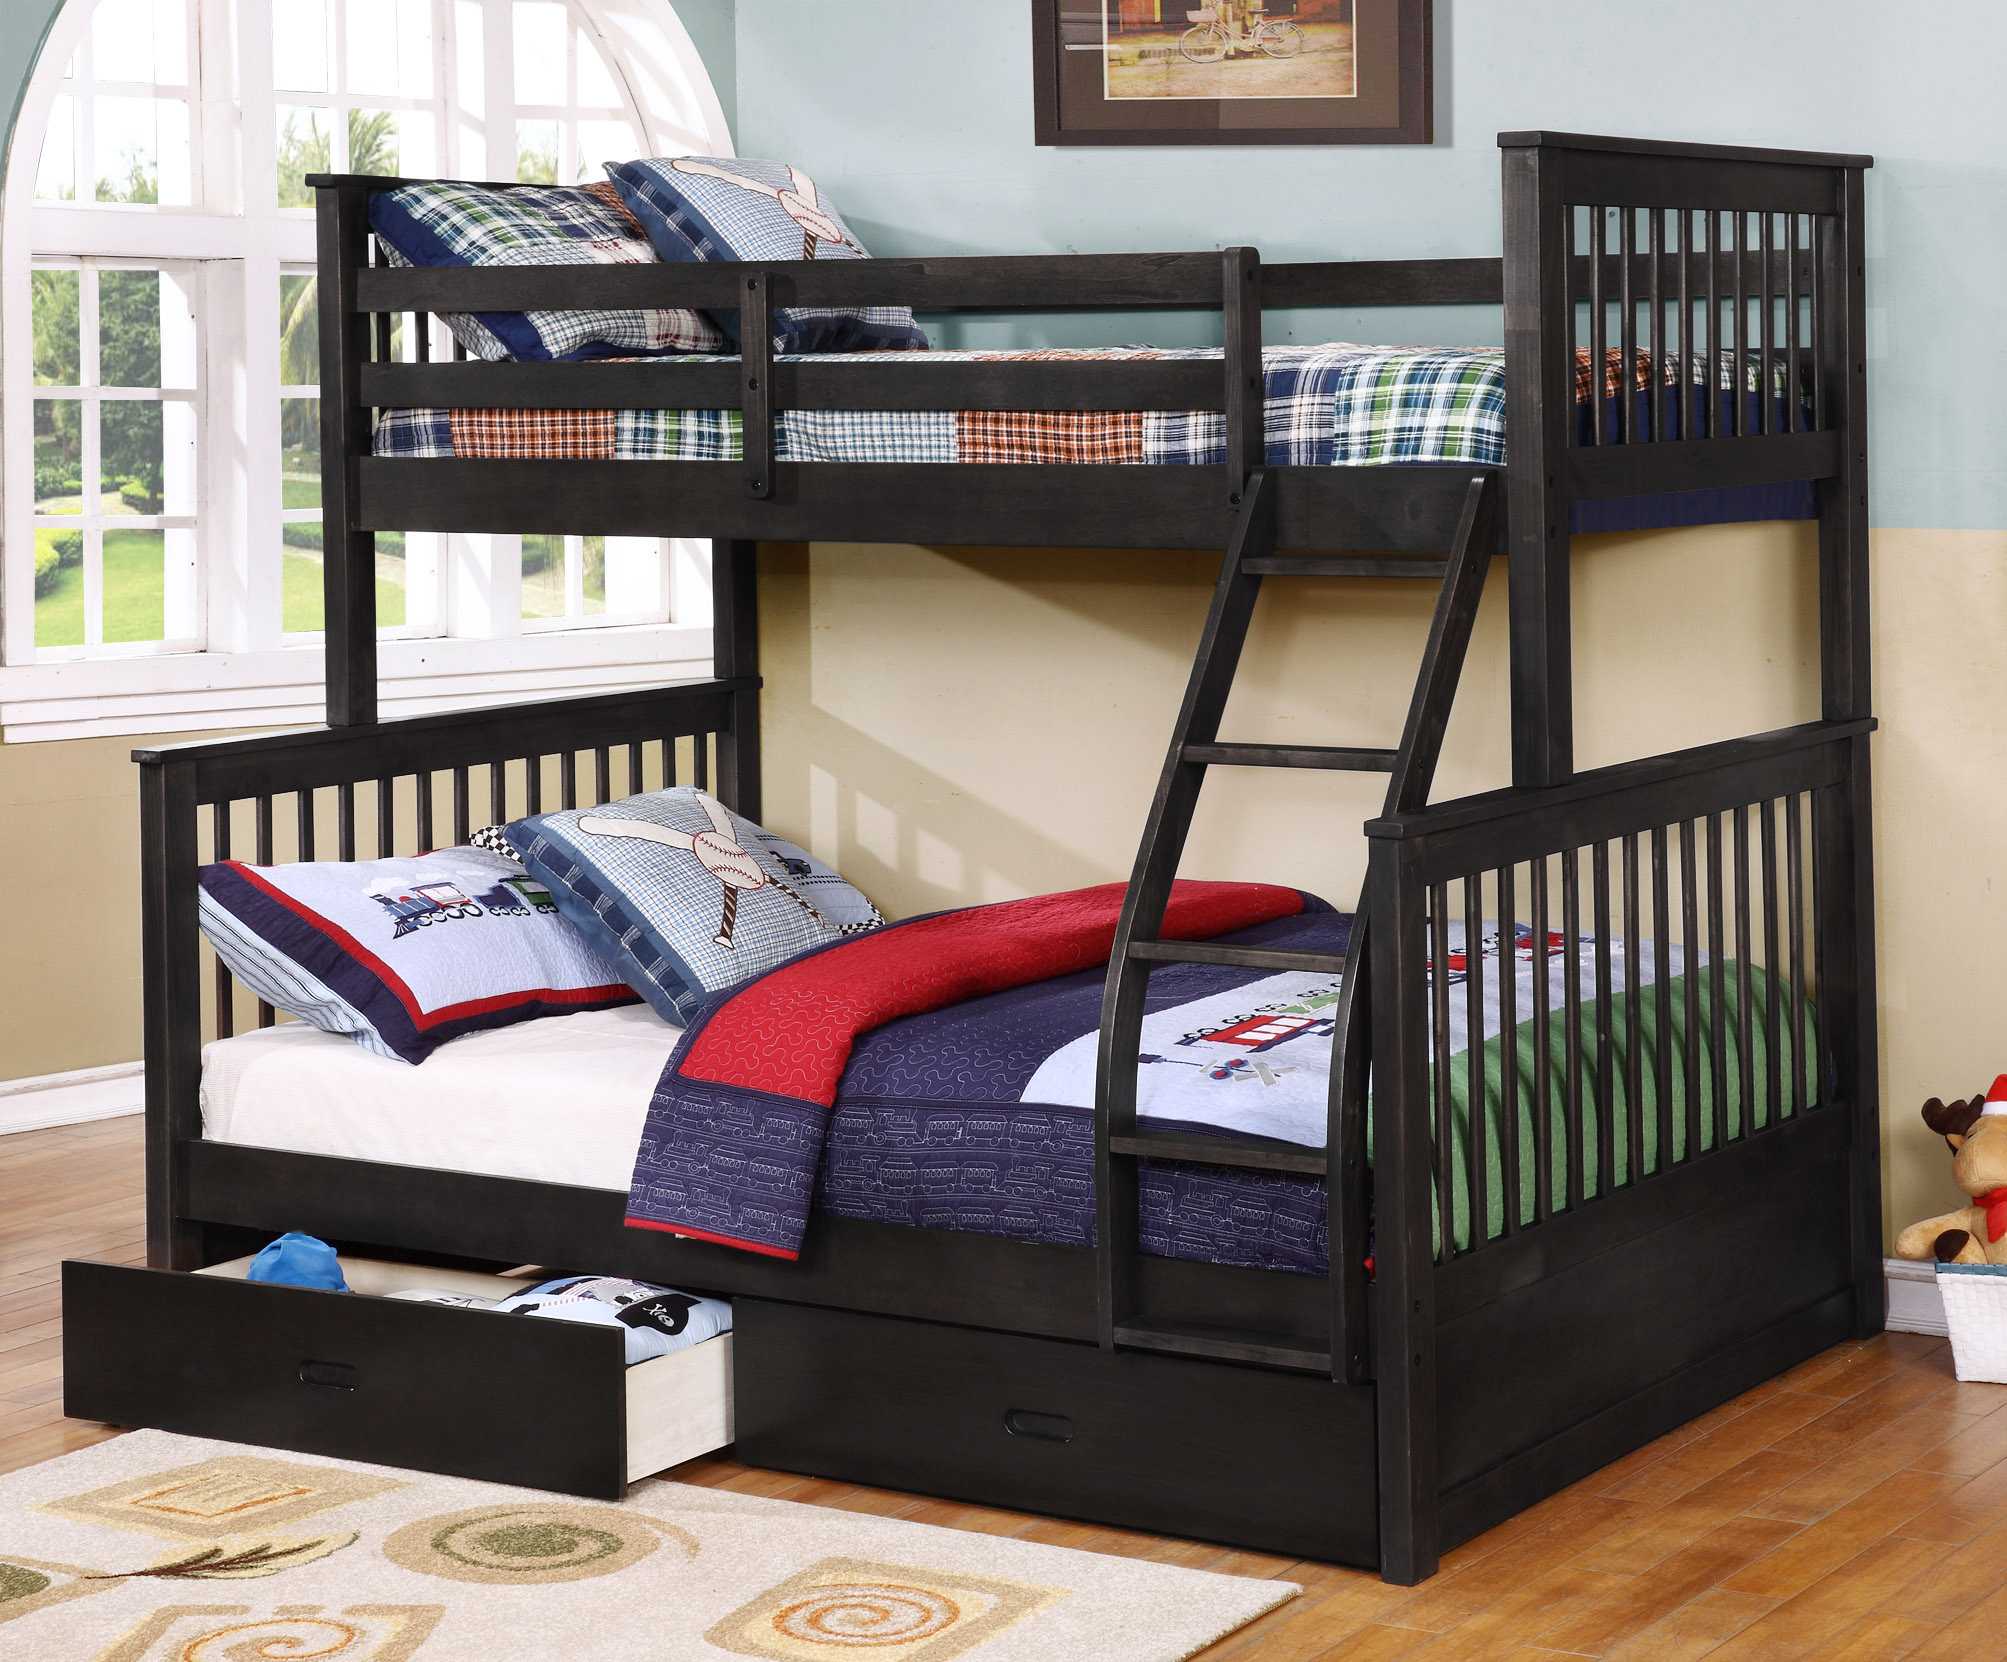 80.5" X 41.5-57.5" X 70.25" Charcoal Manufactured Wood and Solid Wood Twin or Full Bunk Bed with 2 Drawers